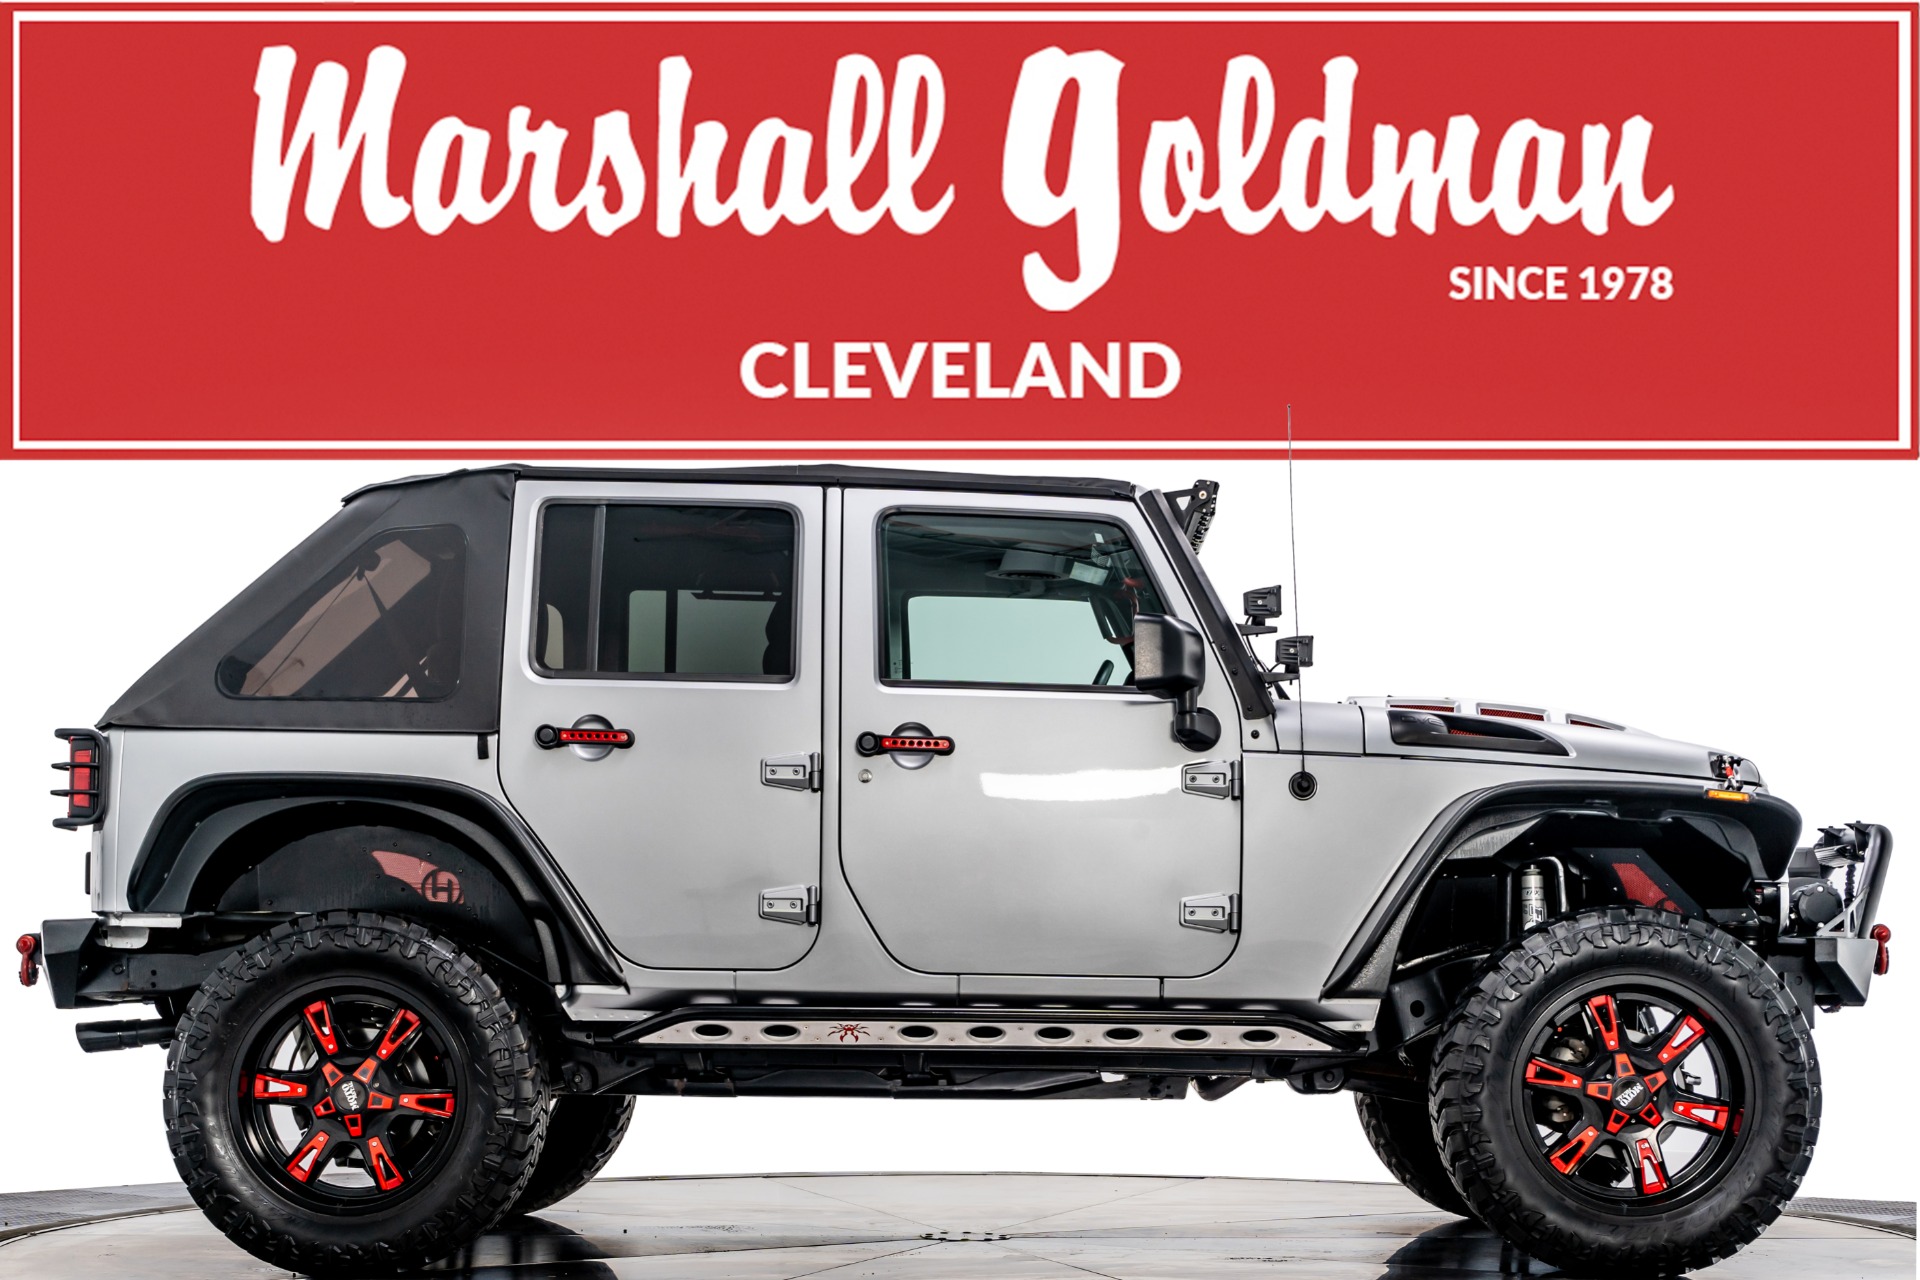 Used 2017 Jeep Wrangler Unlimited Sport S For Sale (Sold) | Marshall  Goldman Cleveland Stock #W21530